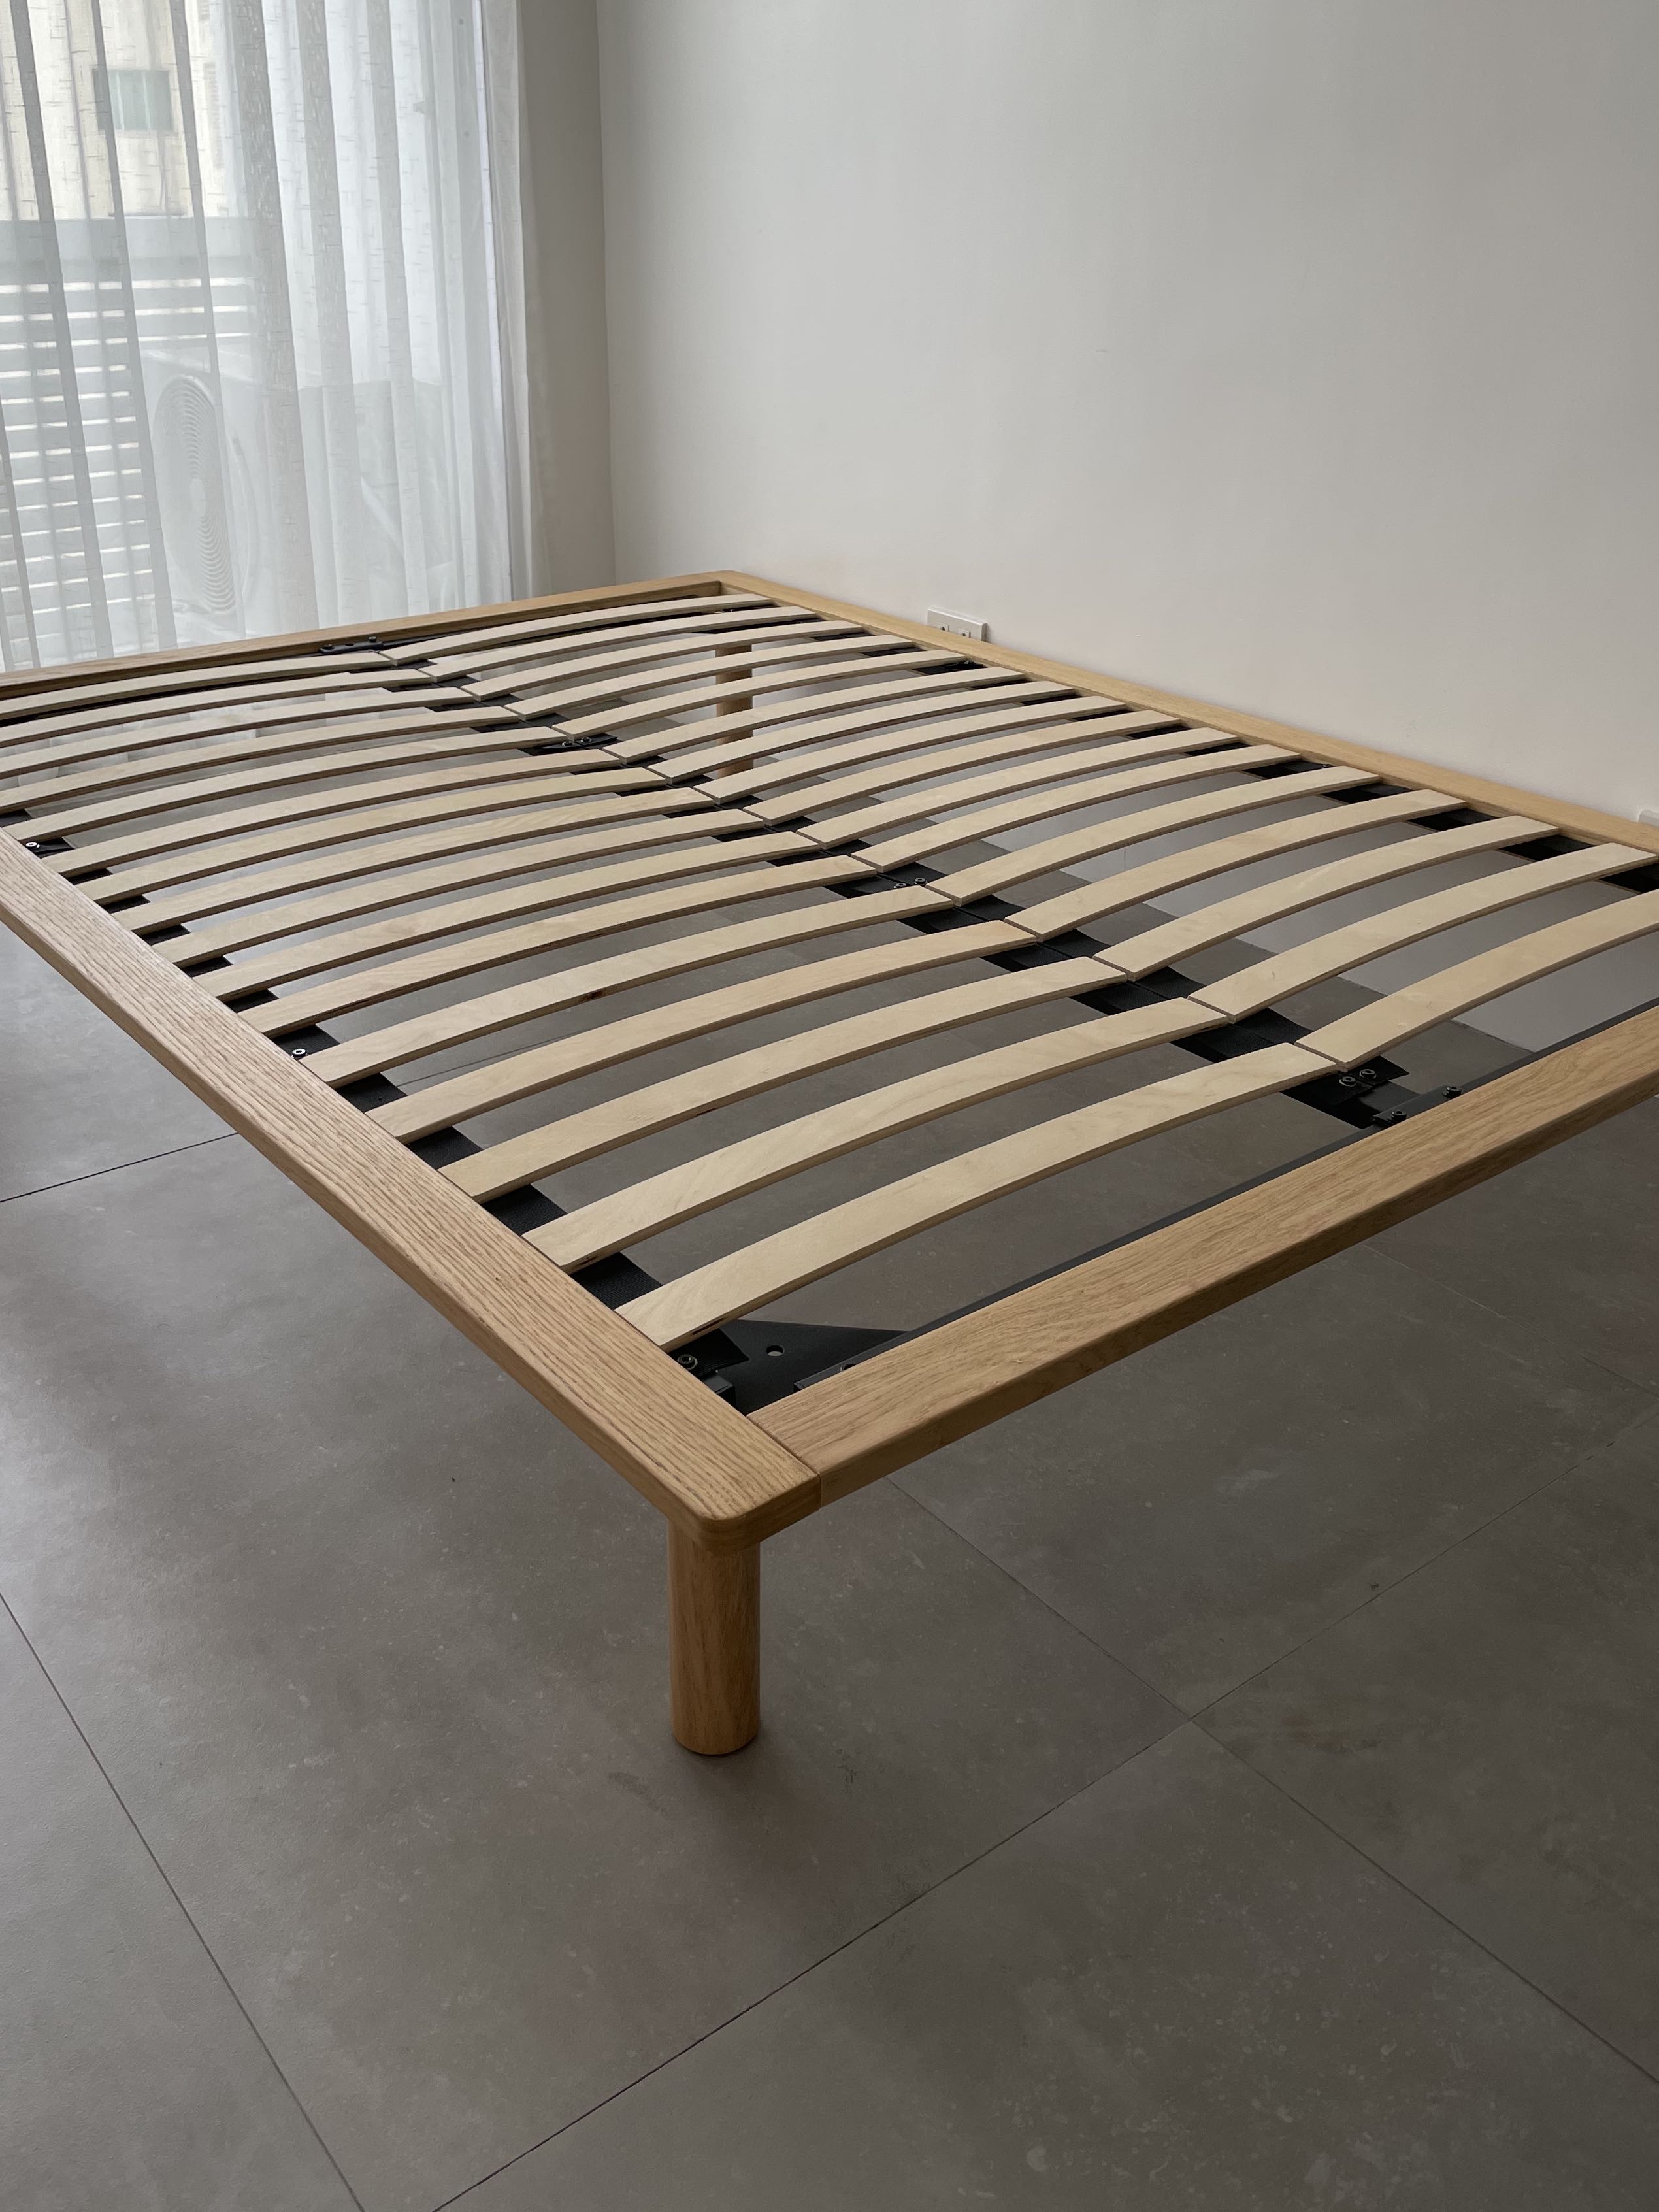 Muji Double Bed Frame Unit With Legs, Muji Storage Bed Frame